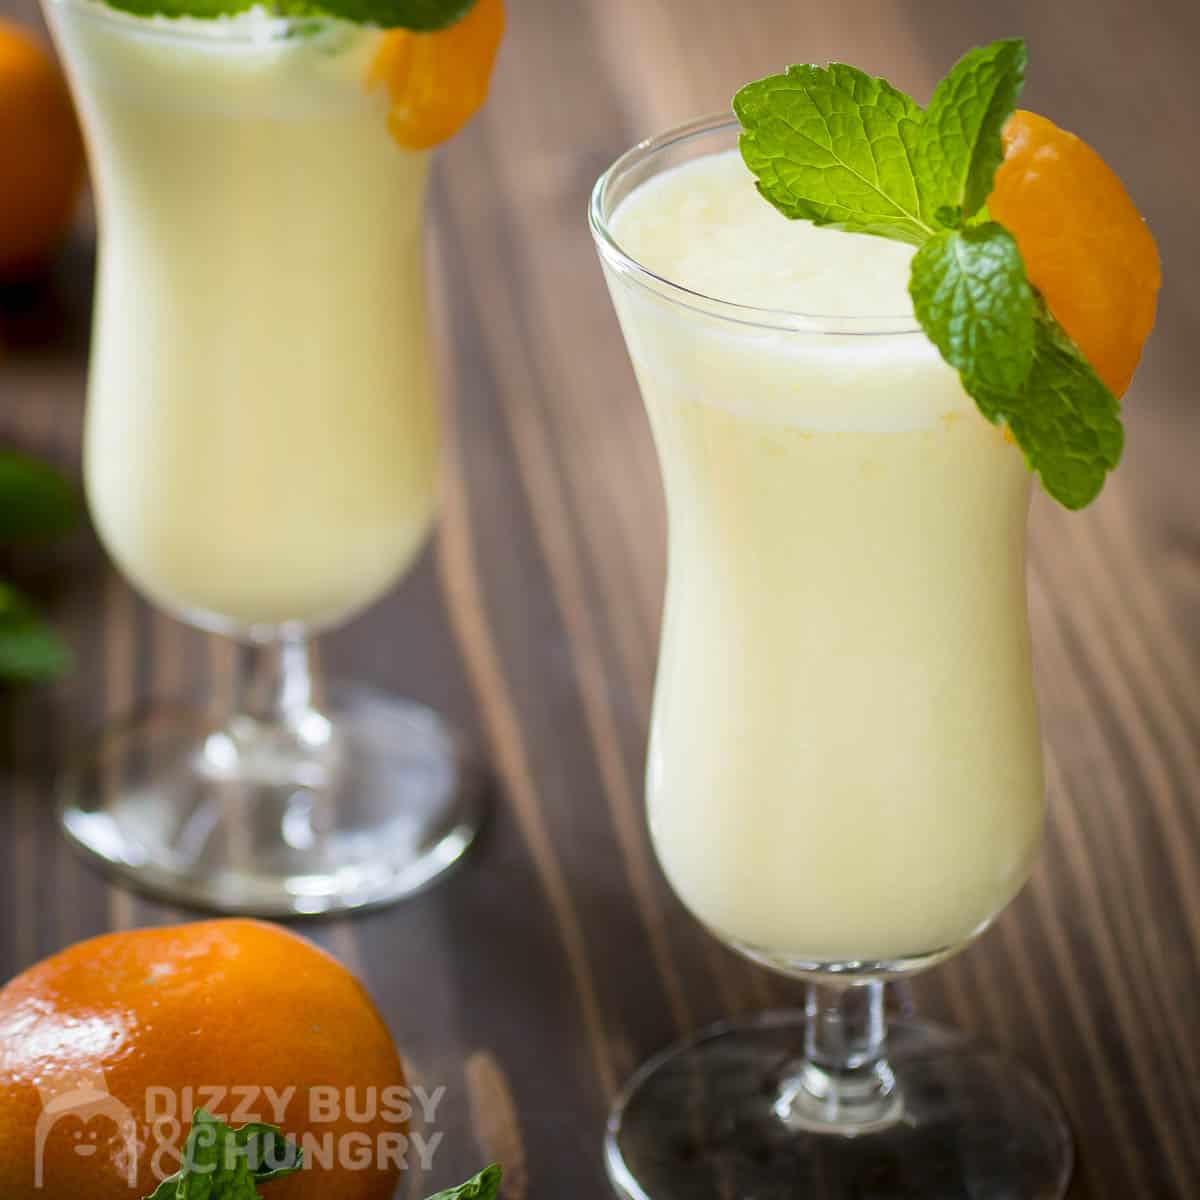 Side shot of two cocktail glasses with orange pineapple smoothie garnished with orange slices and mint with whole oranges and mint sprigs on the side.